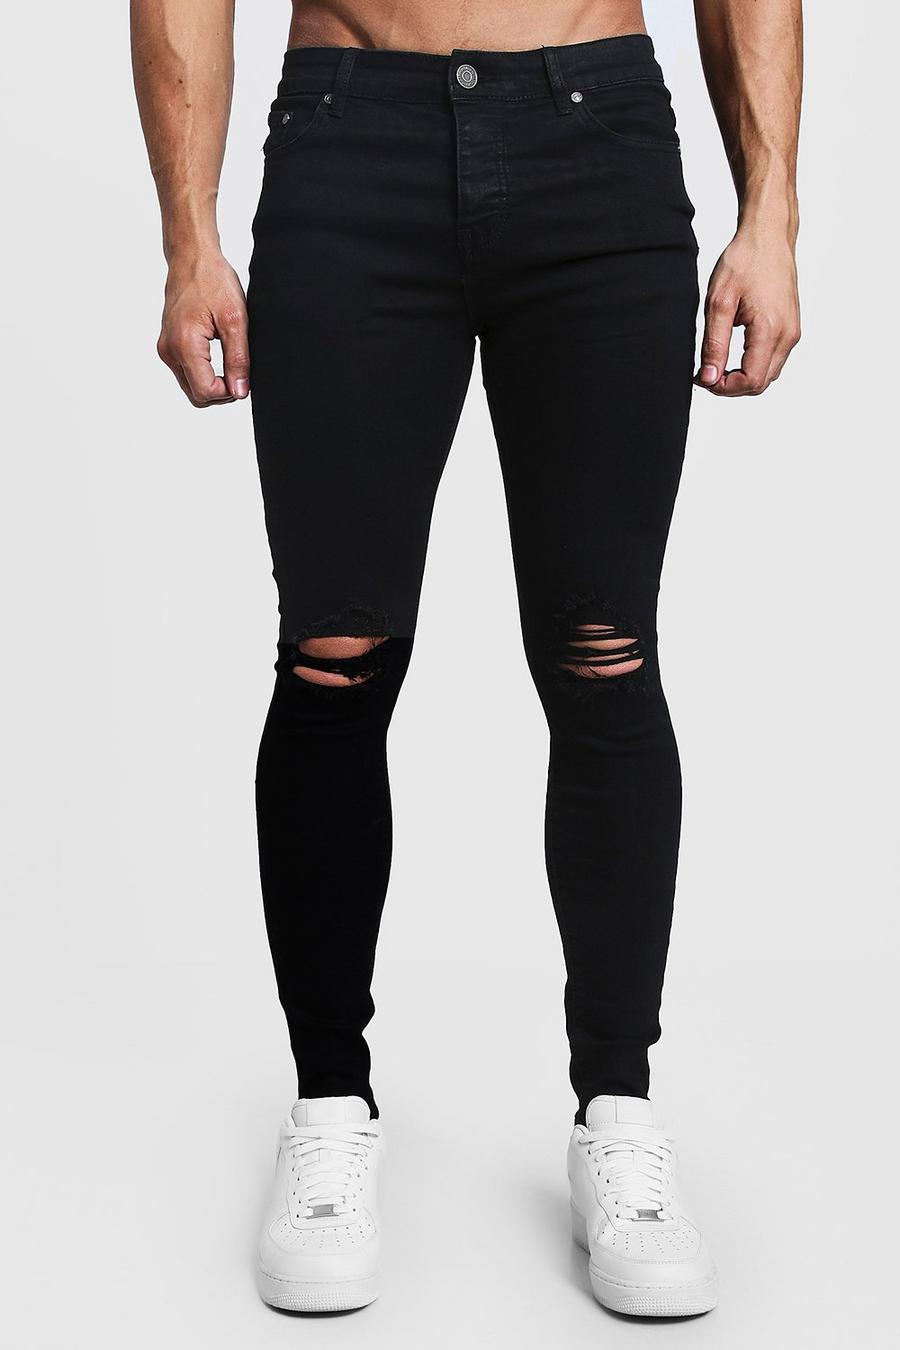 Black Spray On Skinny Jeans With Ripped Knees image number 1